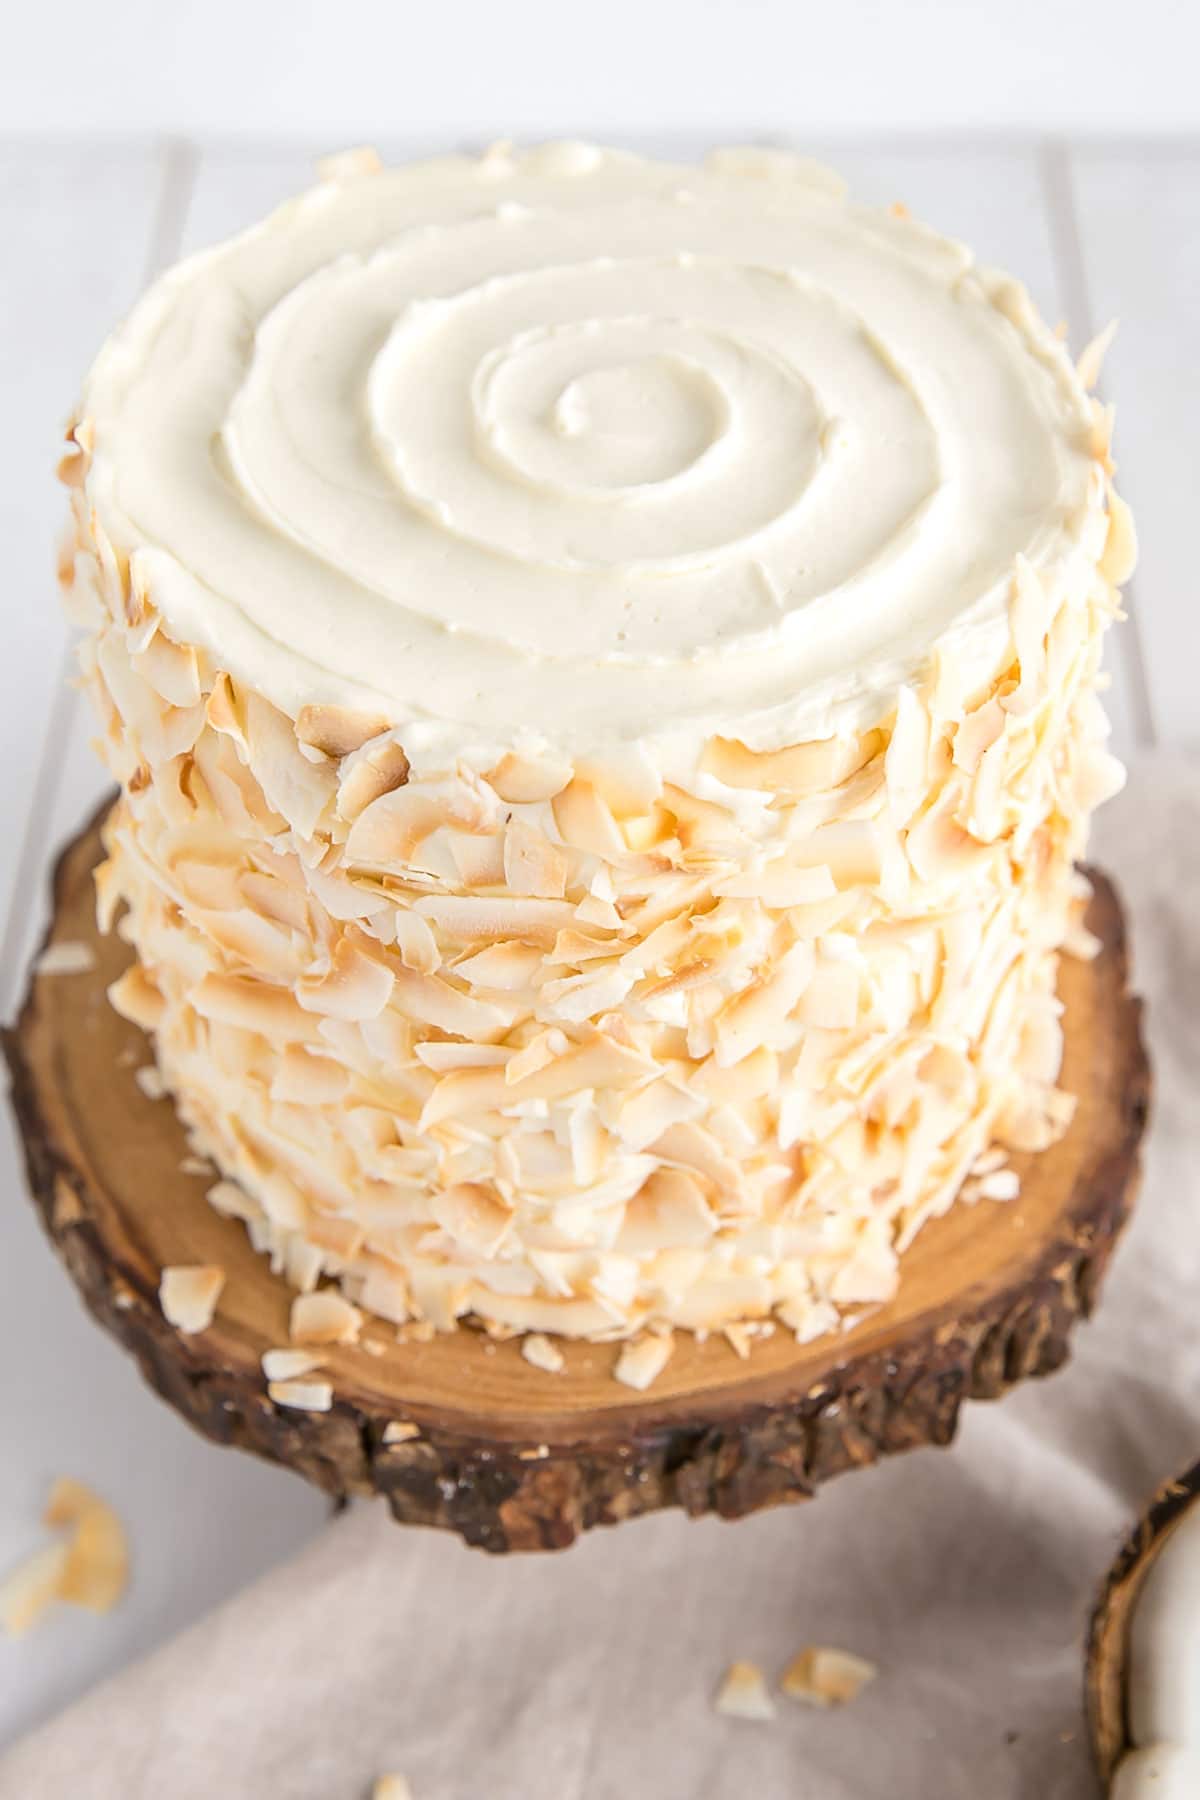 Shot of the top of the cake showing a buttercream swirl.